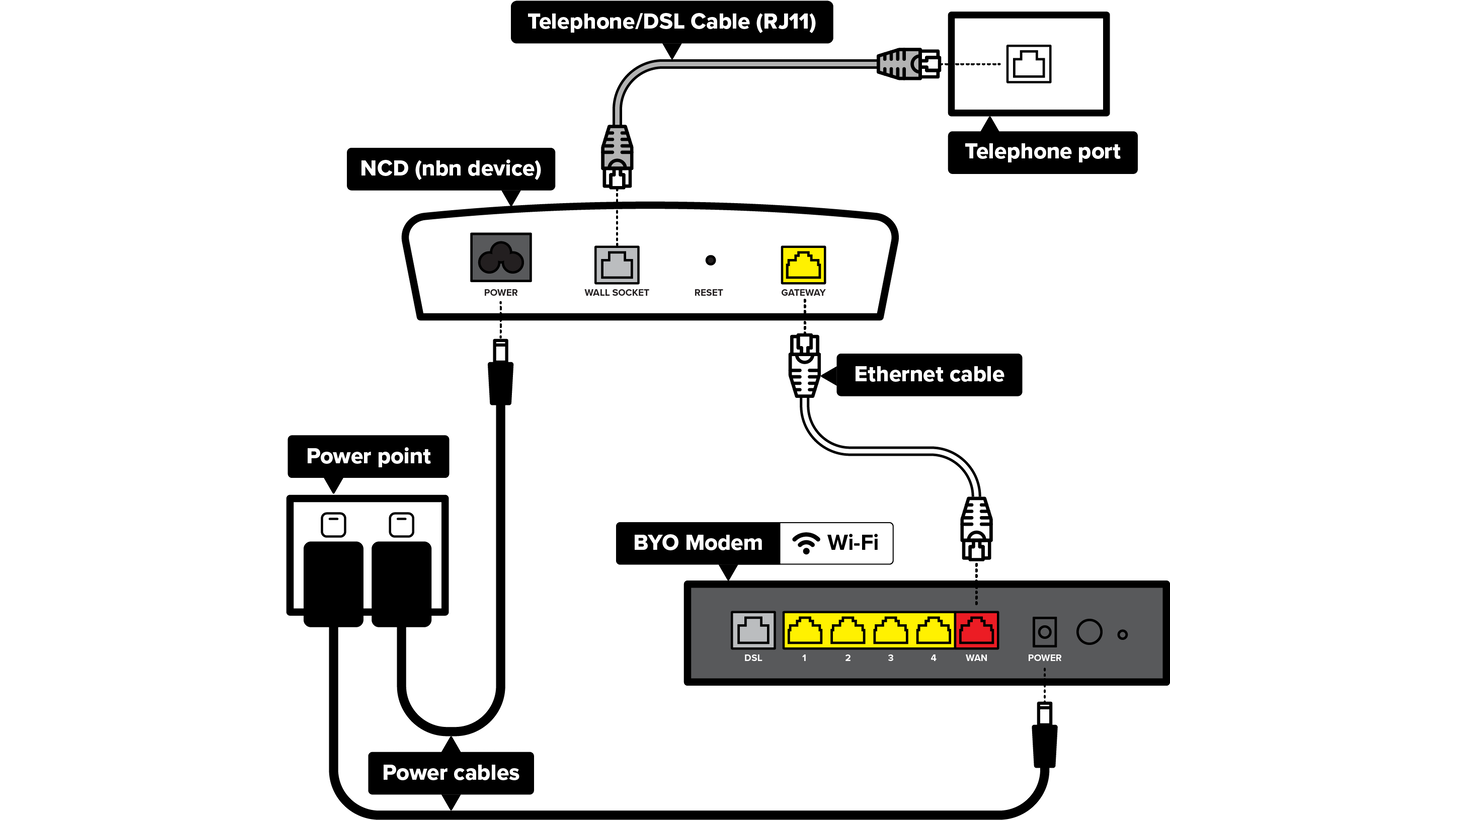 A diagram for FTTC – Fibre to the curb nbn showing how to set up a generic, BYO modem. A telephone port is connected to a nbn connection device using a DSL cable. The nbn device is connected to the modem with an ethernet cable. Both the nbn device and your modem are plugged into power points. The internet can then be accessed through the modem via ethernet cable or wi-fi and the people rejoiced.